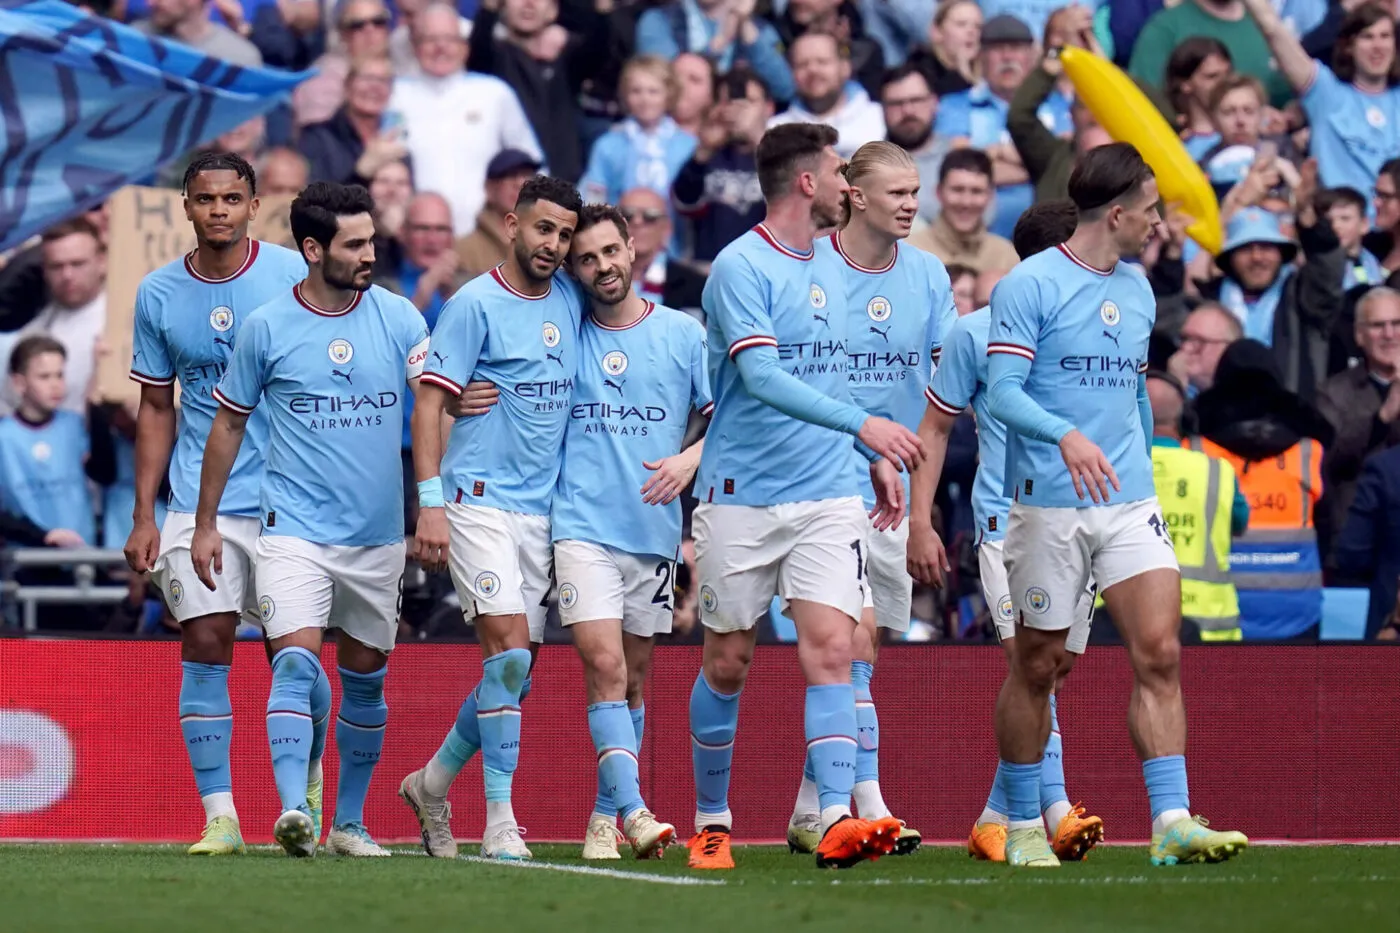 Manchester City's Riyad Mahrez celebrates with team-mates after scoring their side's third goal to complete his hat-trick during the Emirates FA Cup semi final match at Wembley Stadium, London. Picture date: Saturday April 22, 2023. - Photo by Icon sport